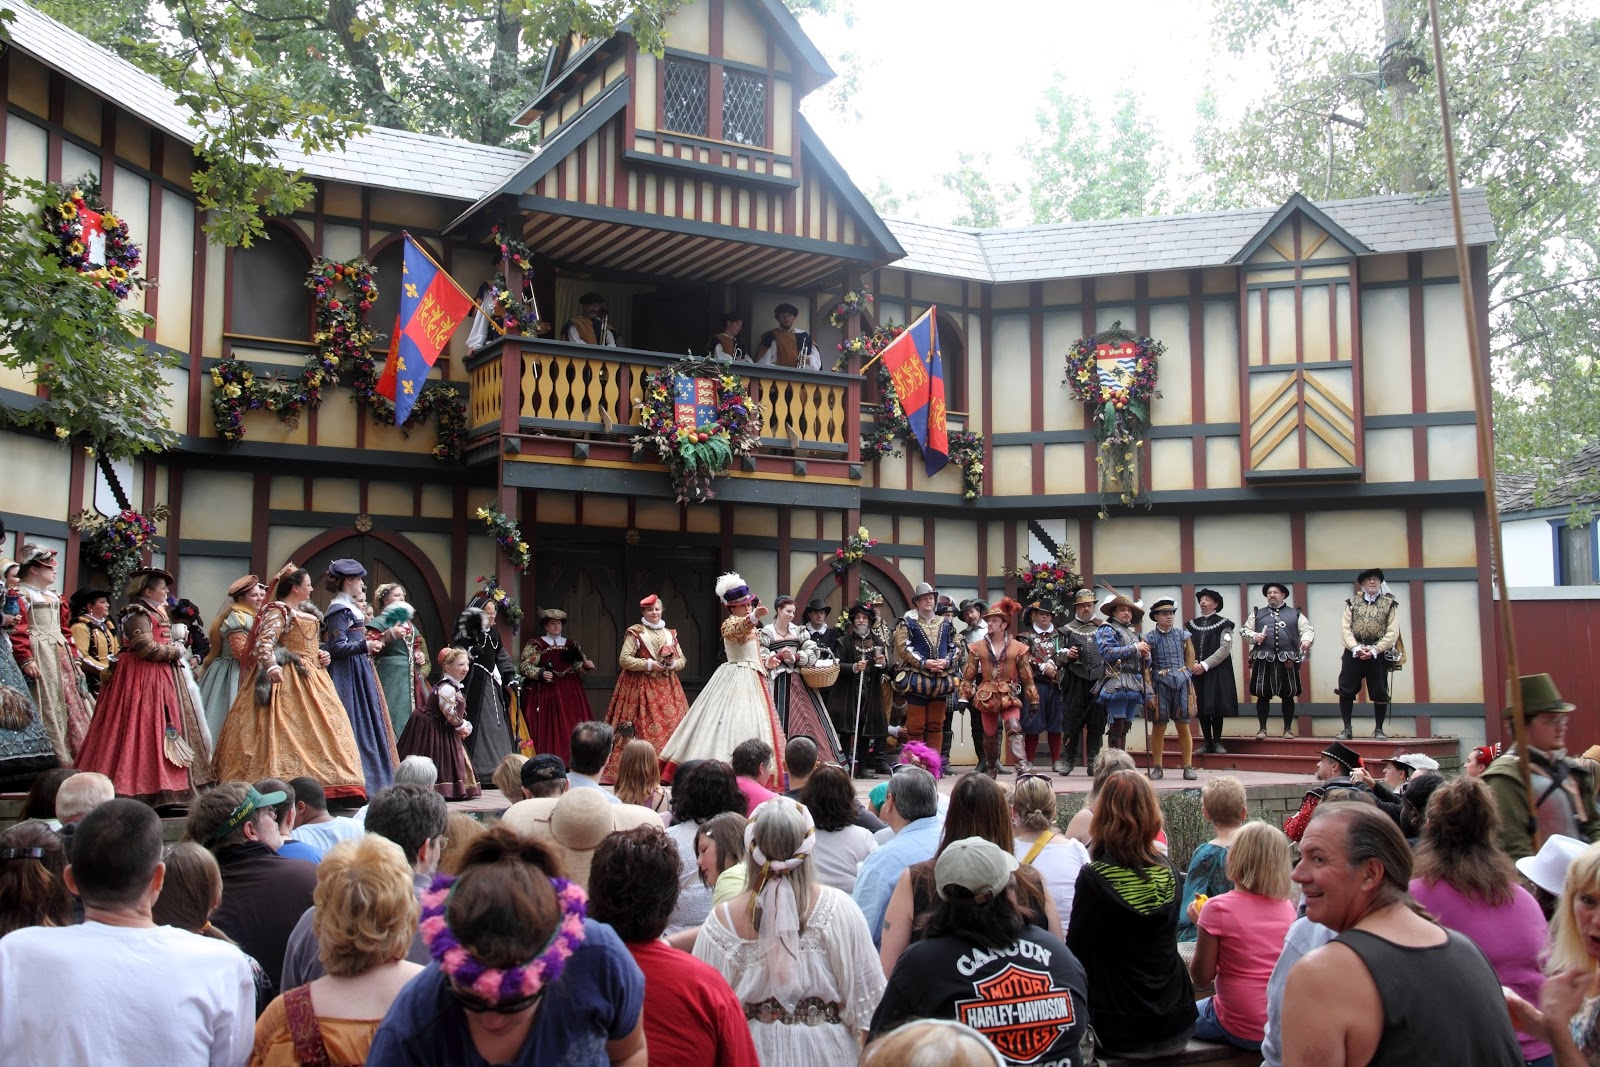 6 Things You Might Not Know About the Renaissance Festival